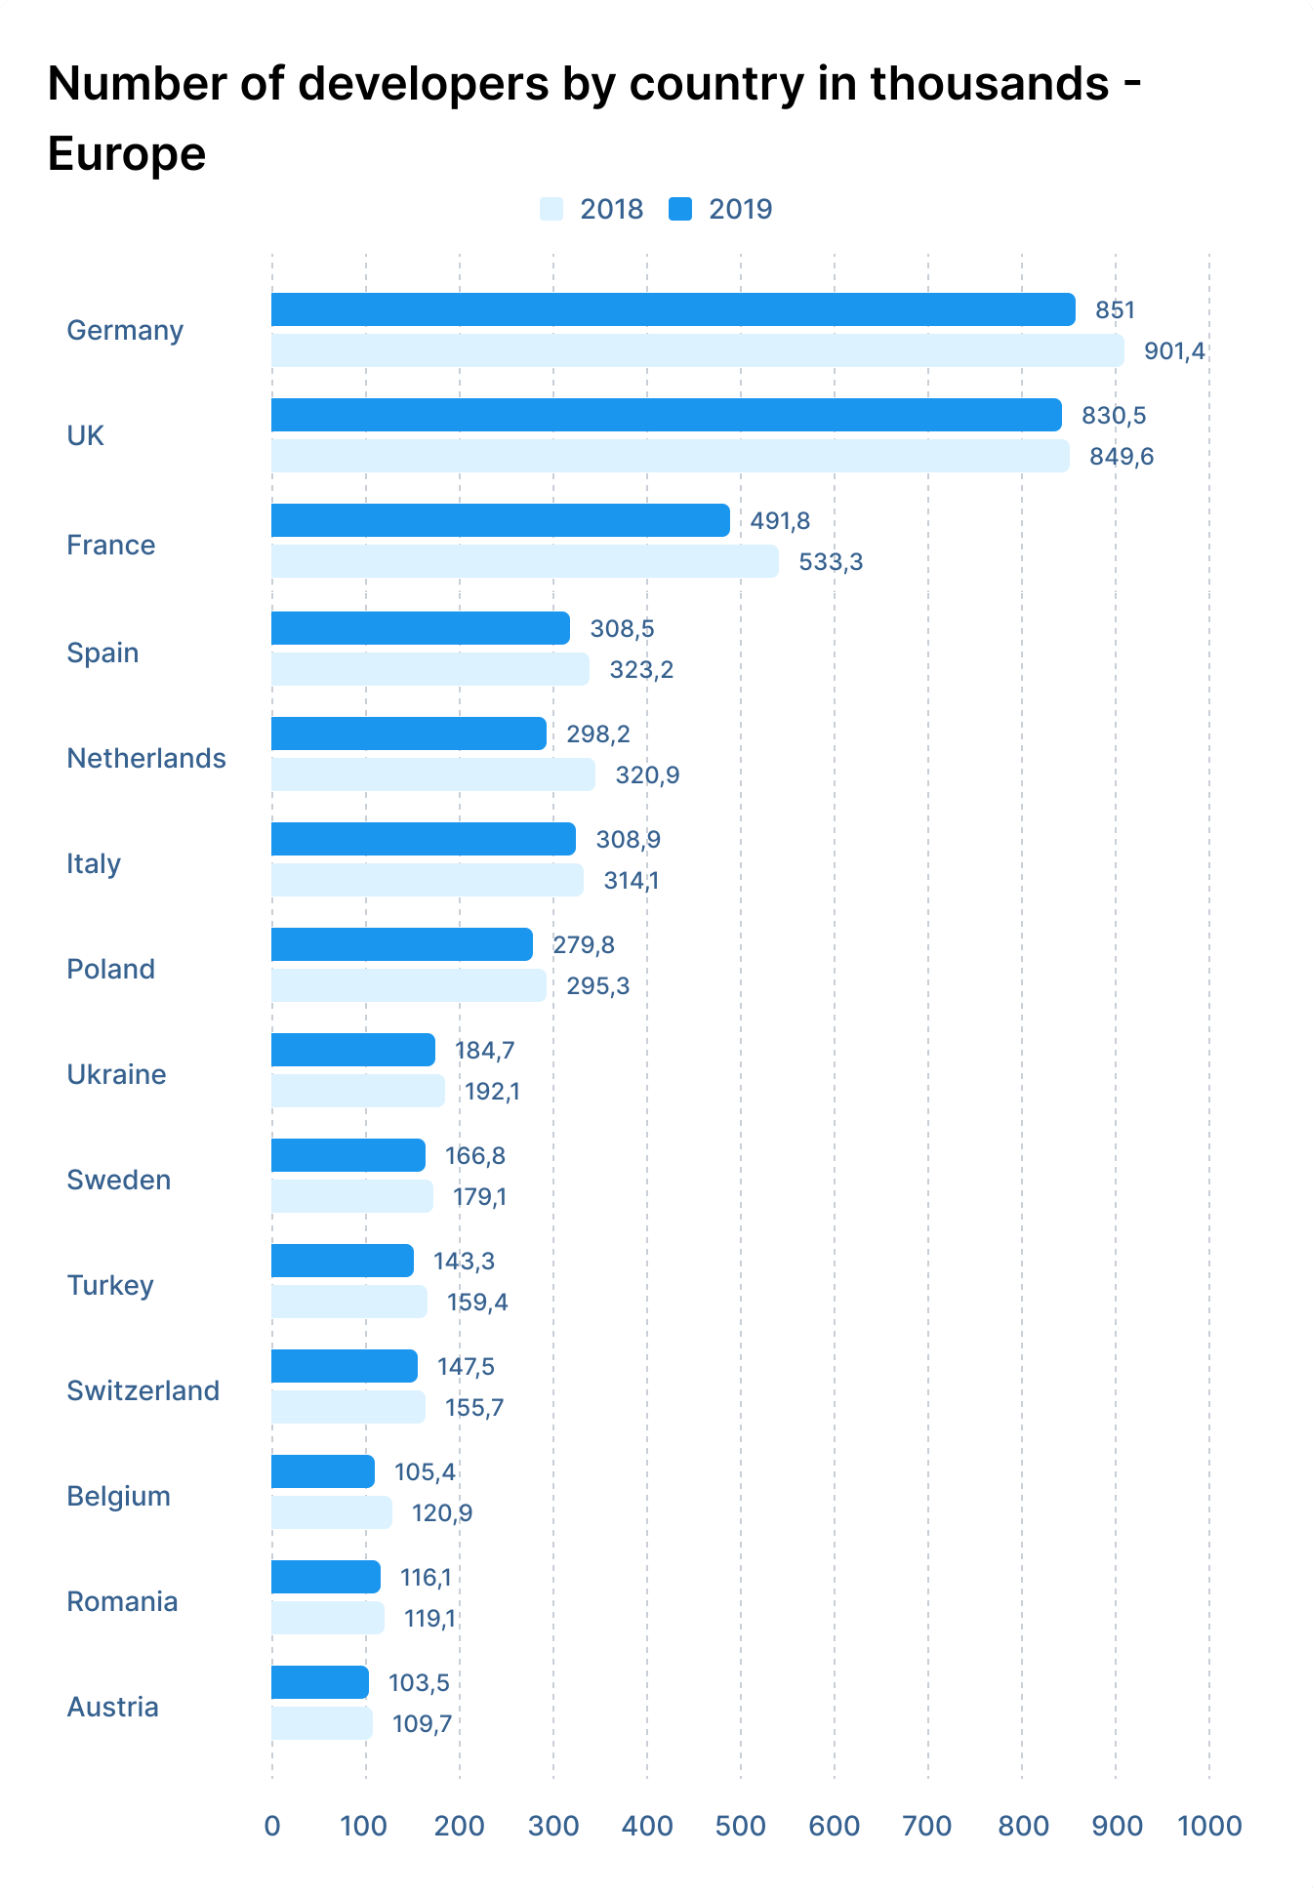 Number of developers by country in thousands - Europe